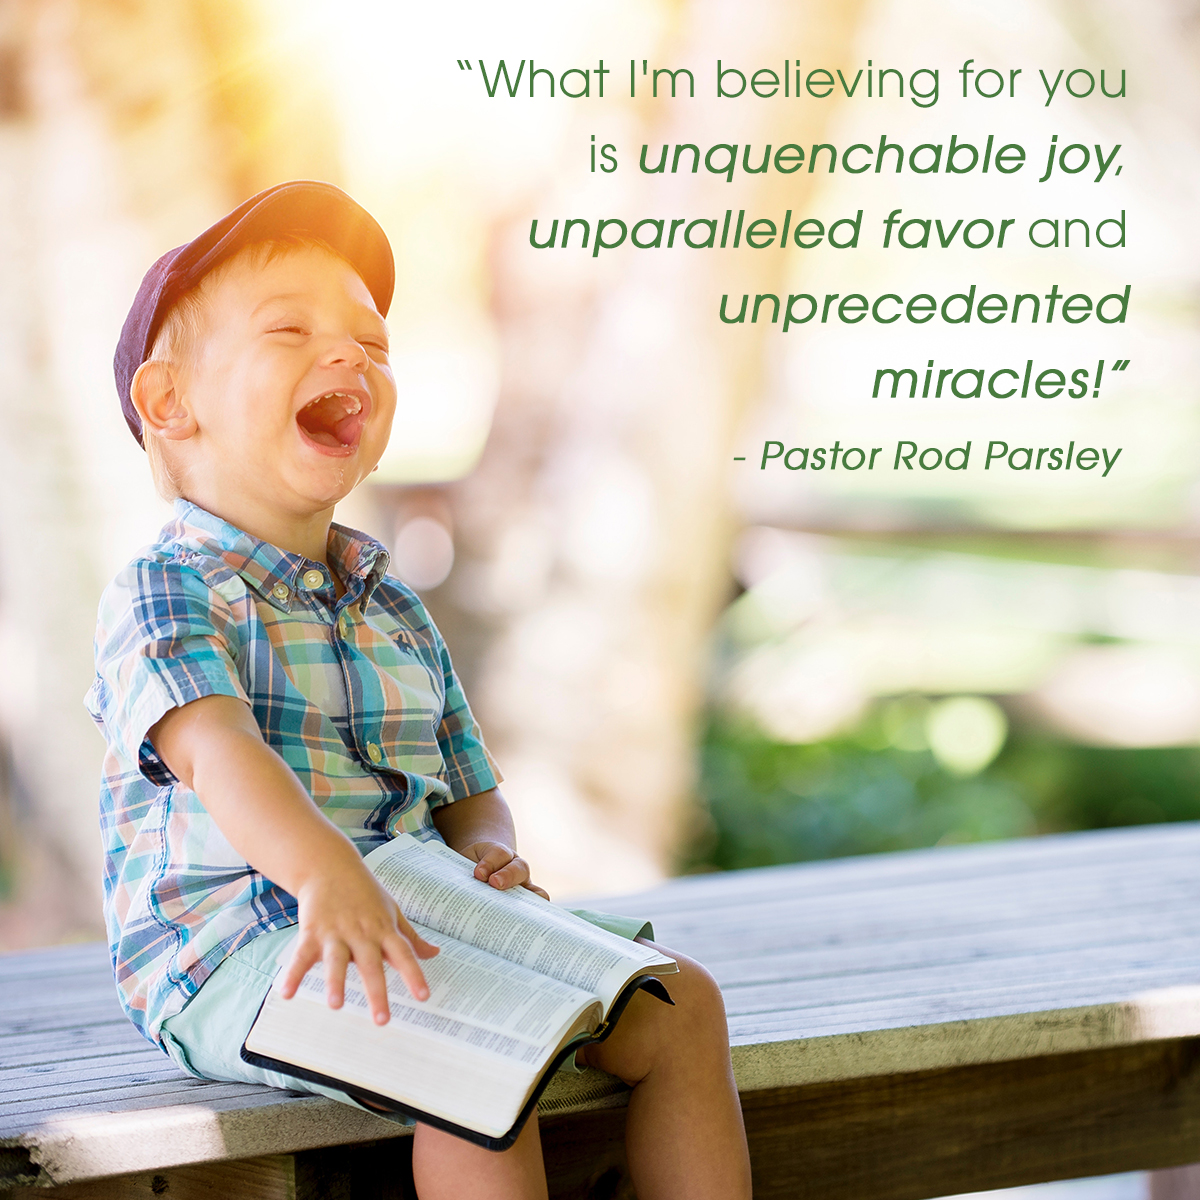 “What I’m believing for you is unquenchable joy, unparalleled favor and unprecedented miracles!” – Pastor Rod Parsley